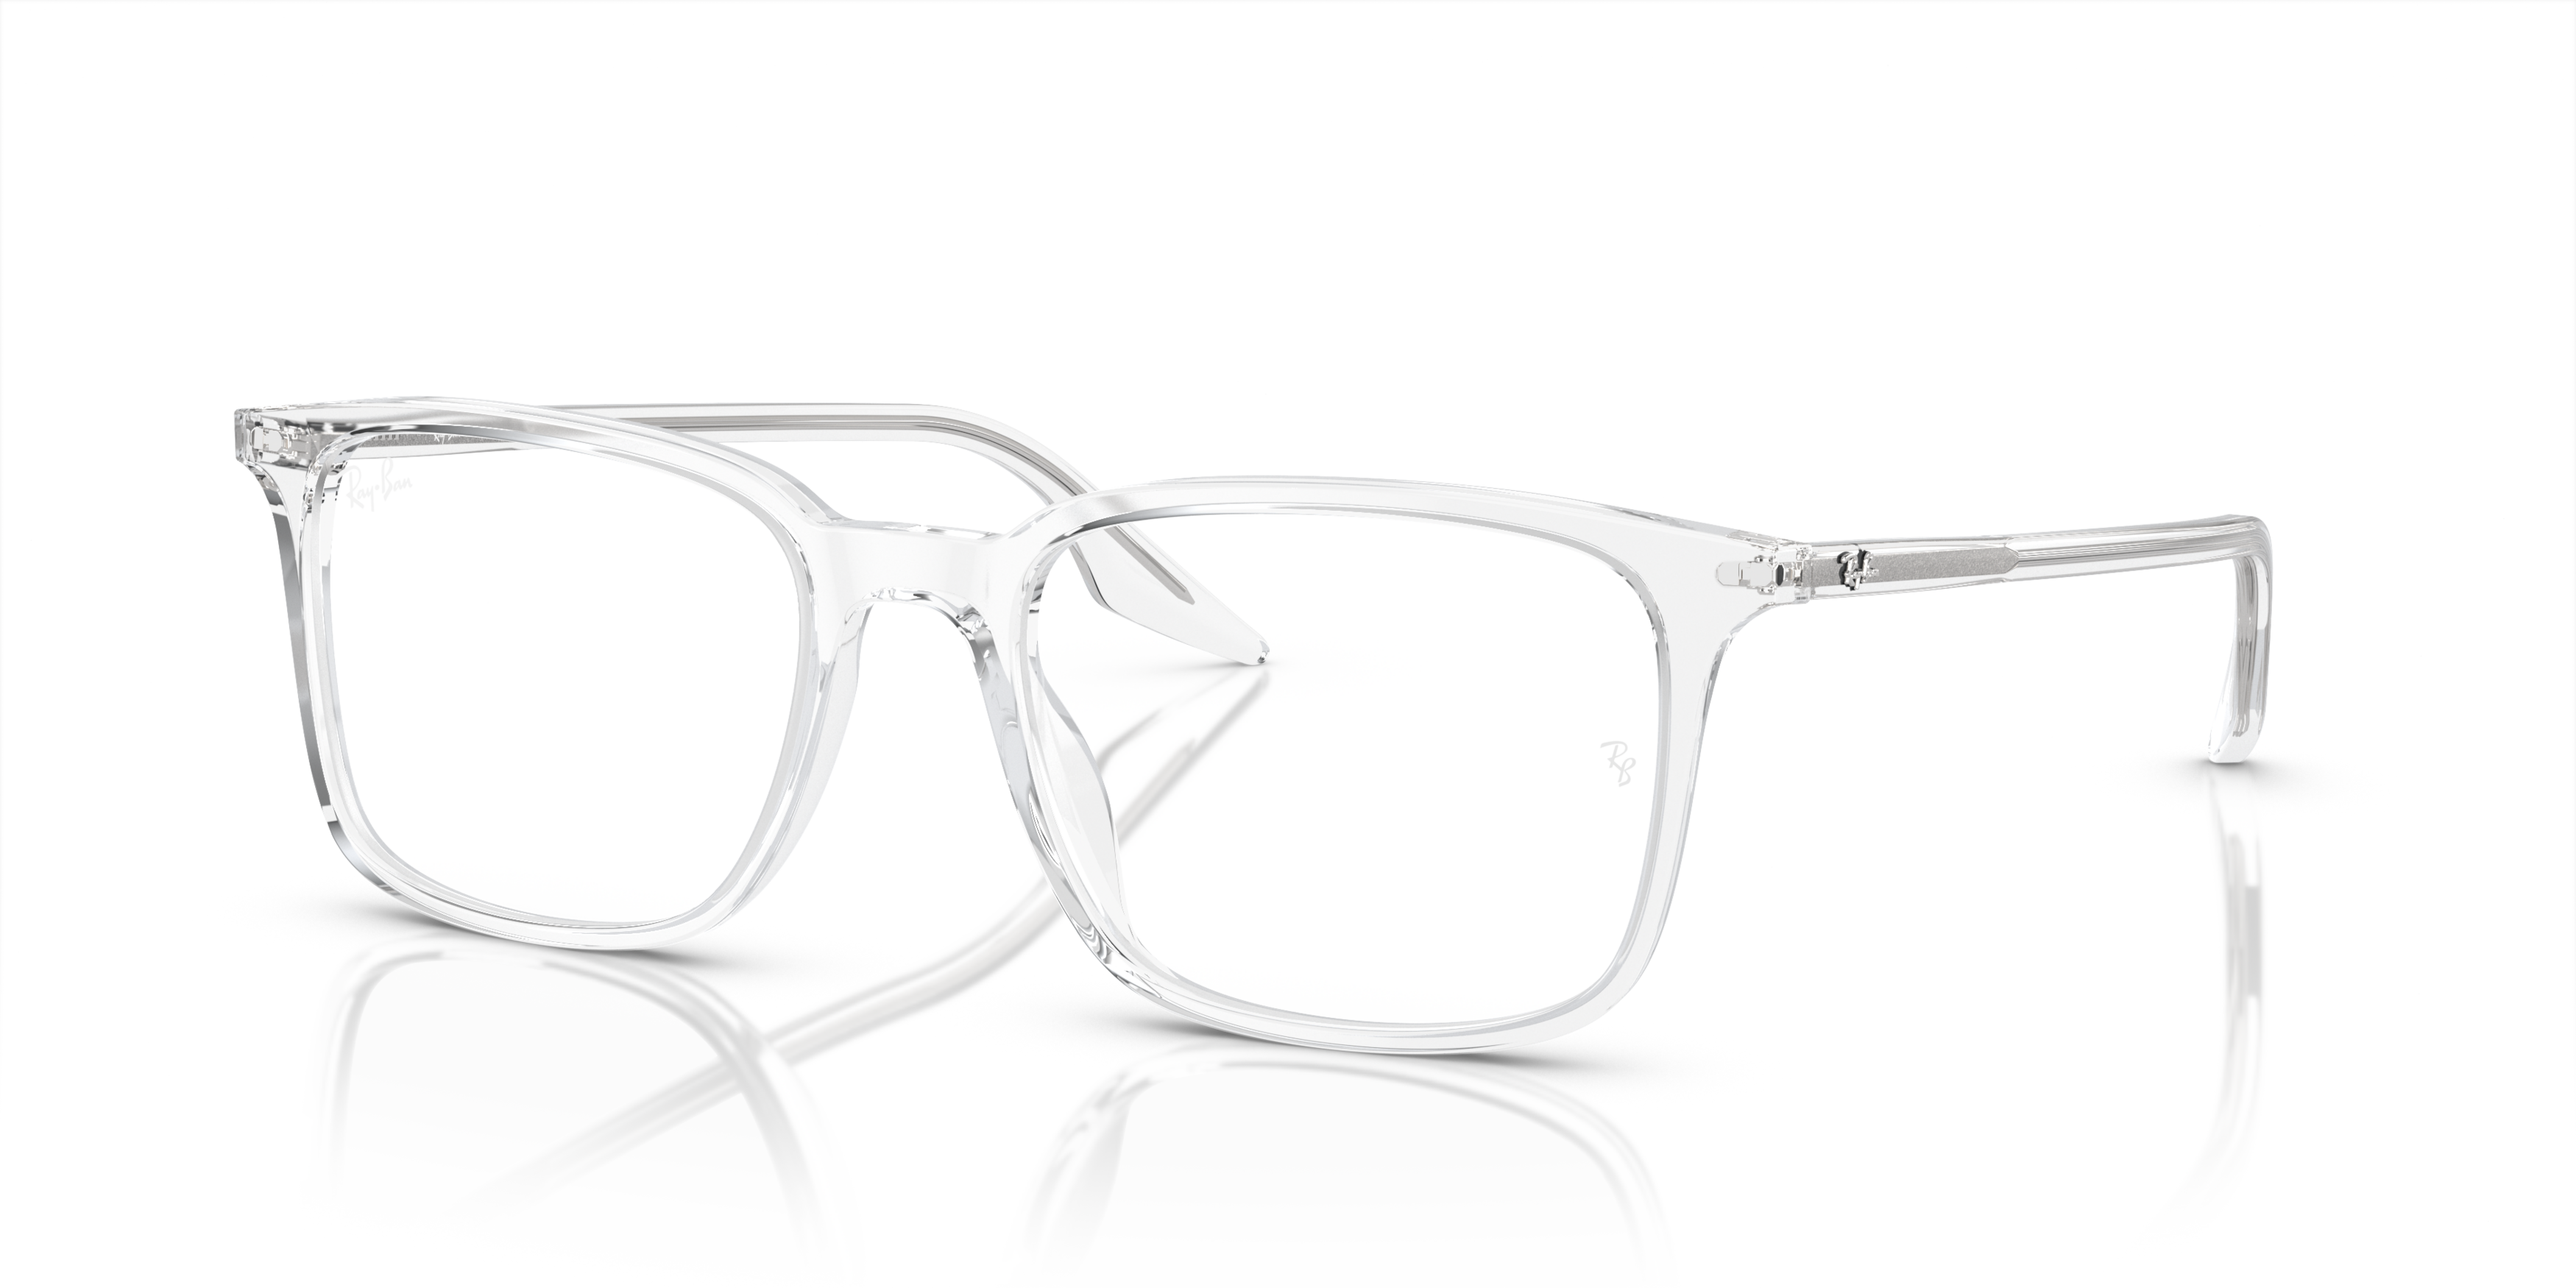 Angle_Left01 Ray-Ban RX 5421 Glasses Transparent / Transparent, Clear